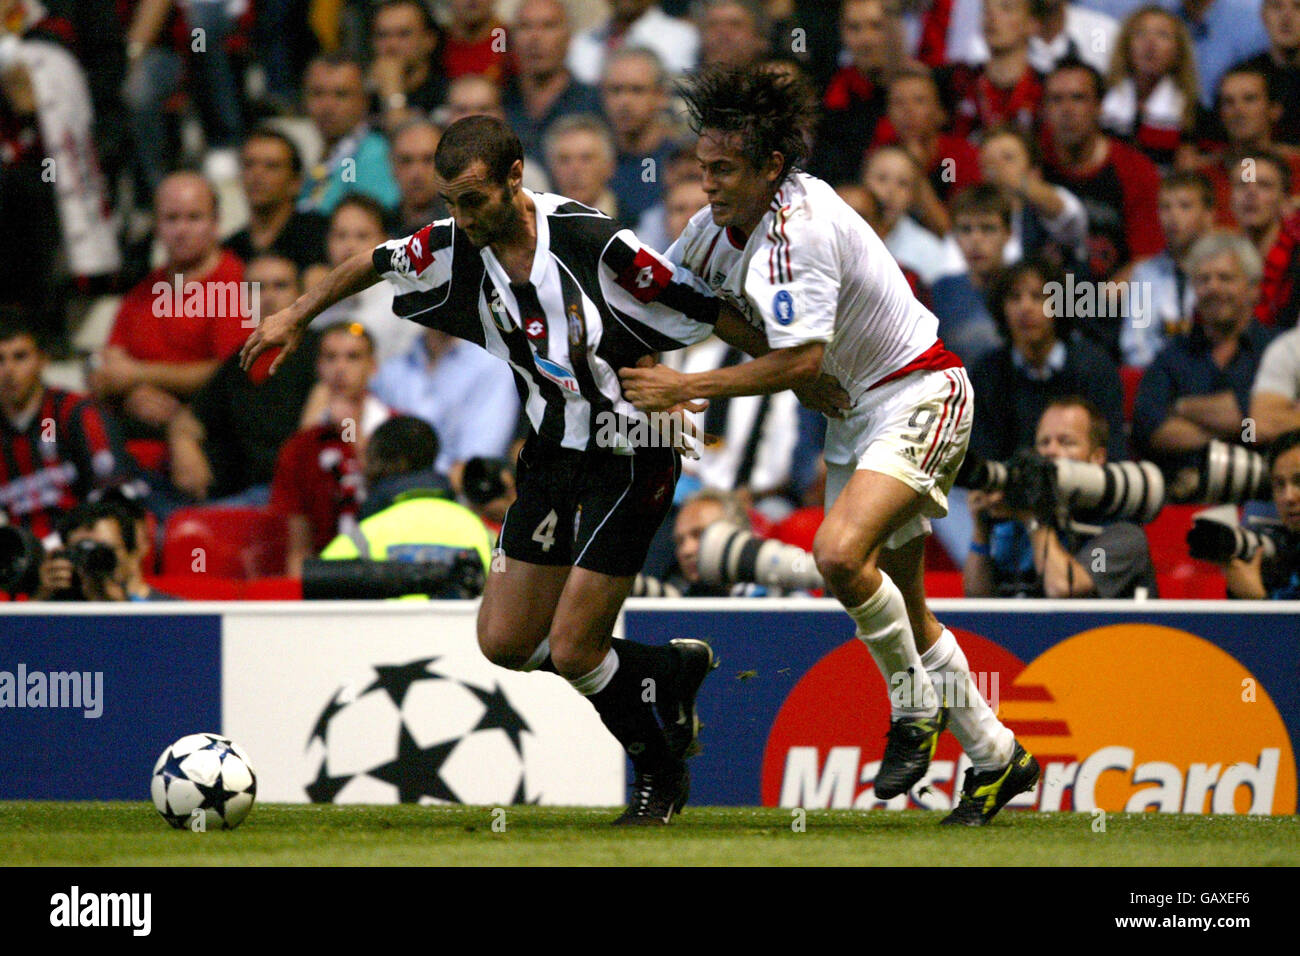 Soccer - UEFA Champions League - Final - Juventus v AC Milan. Juventus' Paolo Montero (l) and AC Milan's Filippo Inzaghi (r) battle for the ball Stock Photo